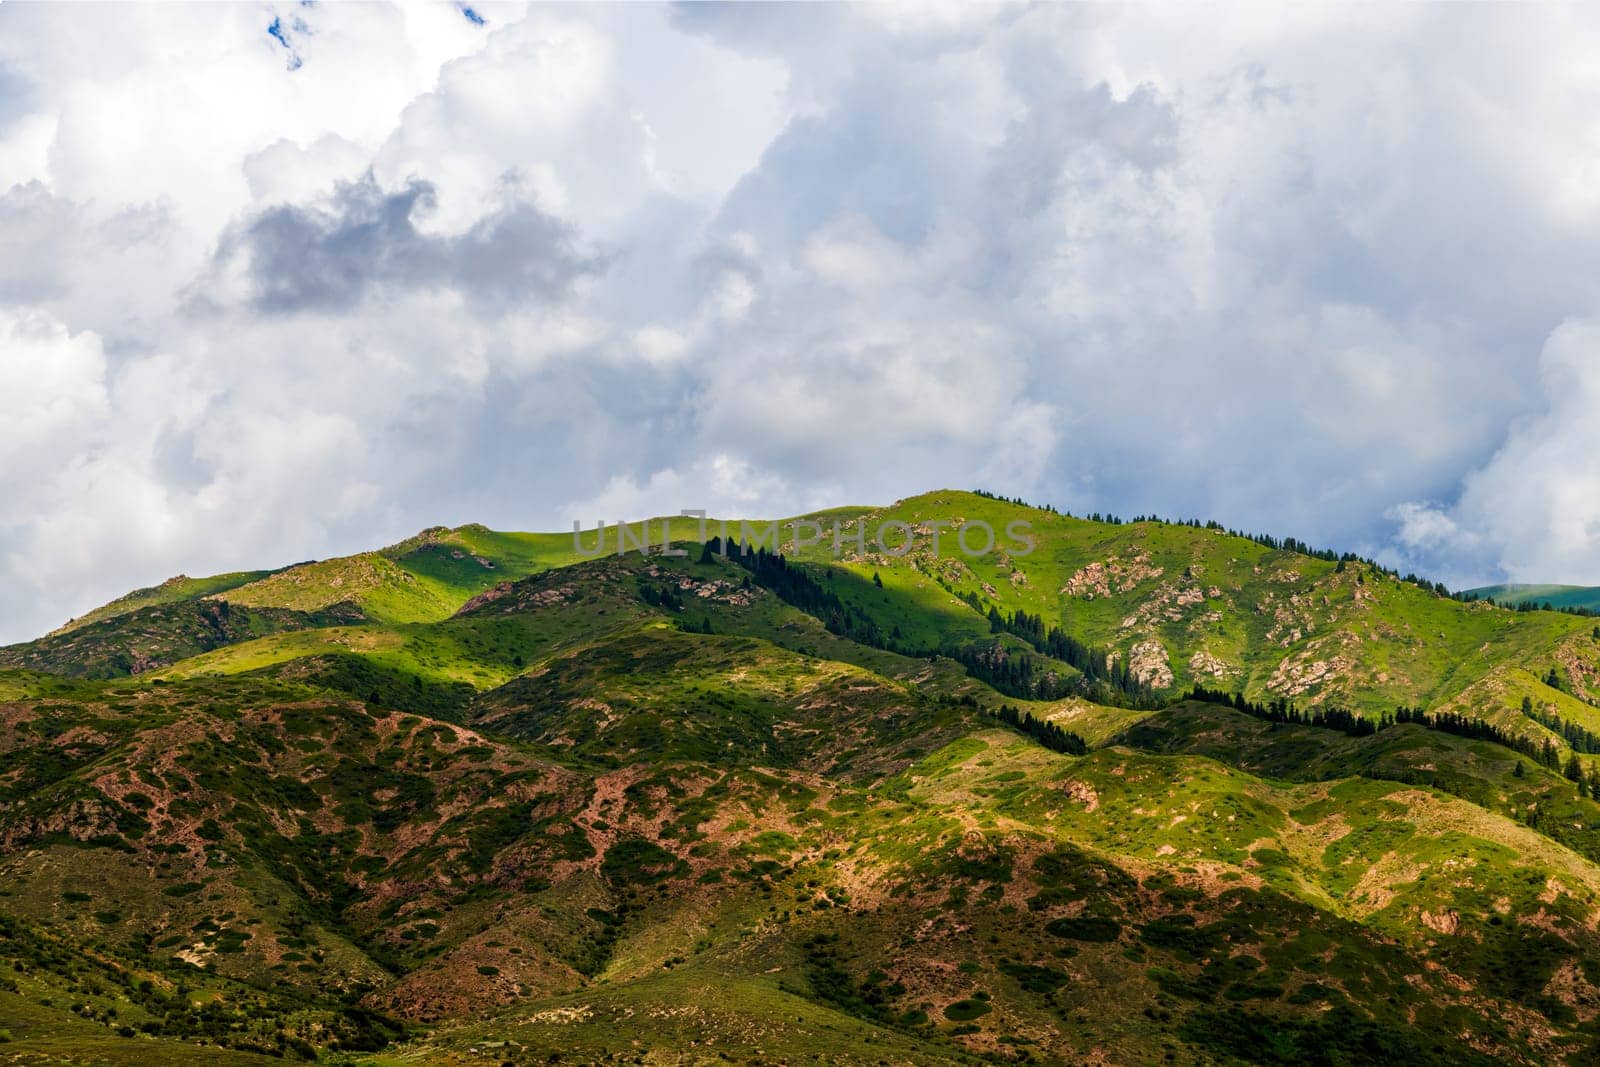 Green mountain against cloudy sky with grassy slope by z1b